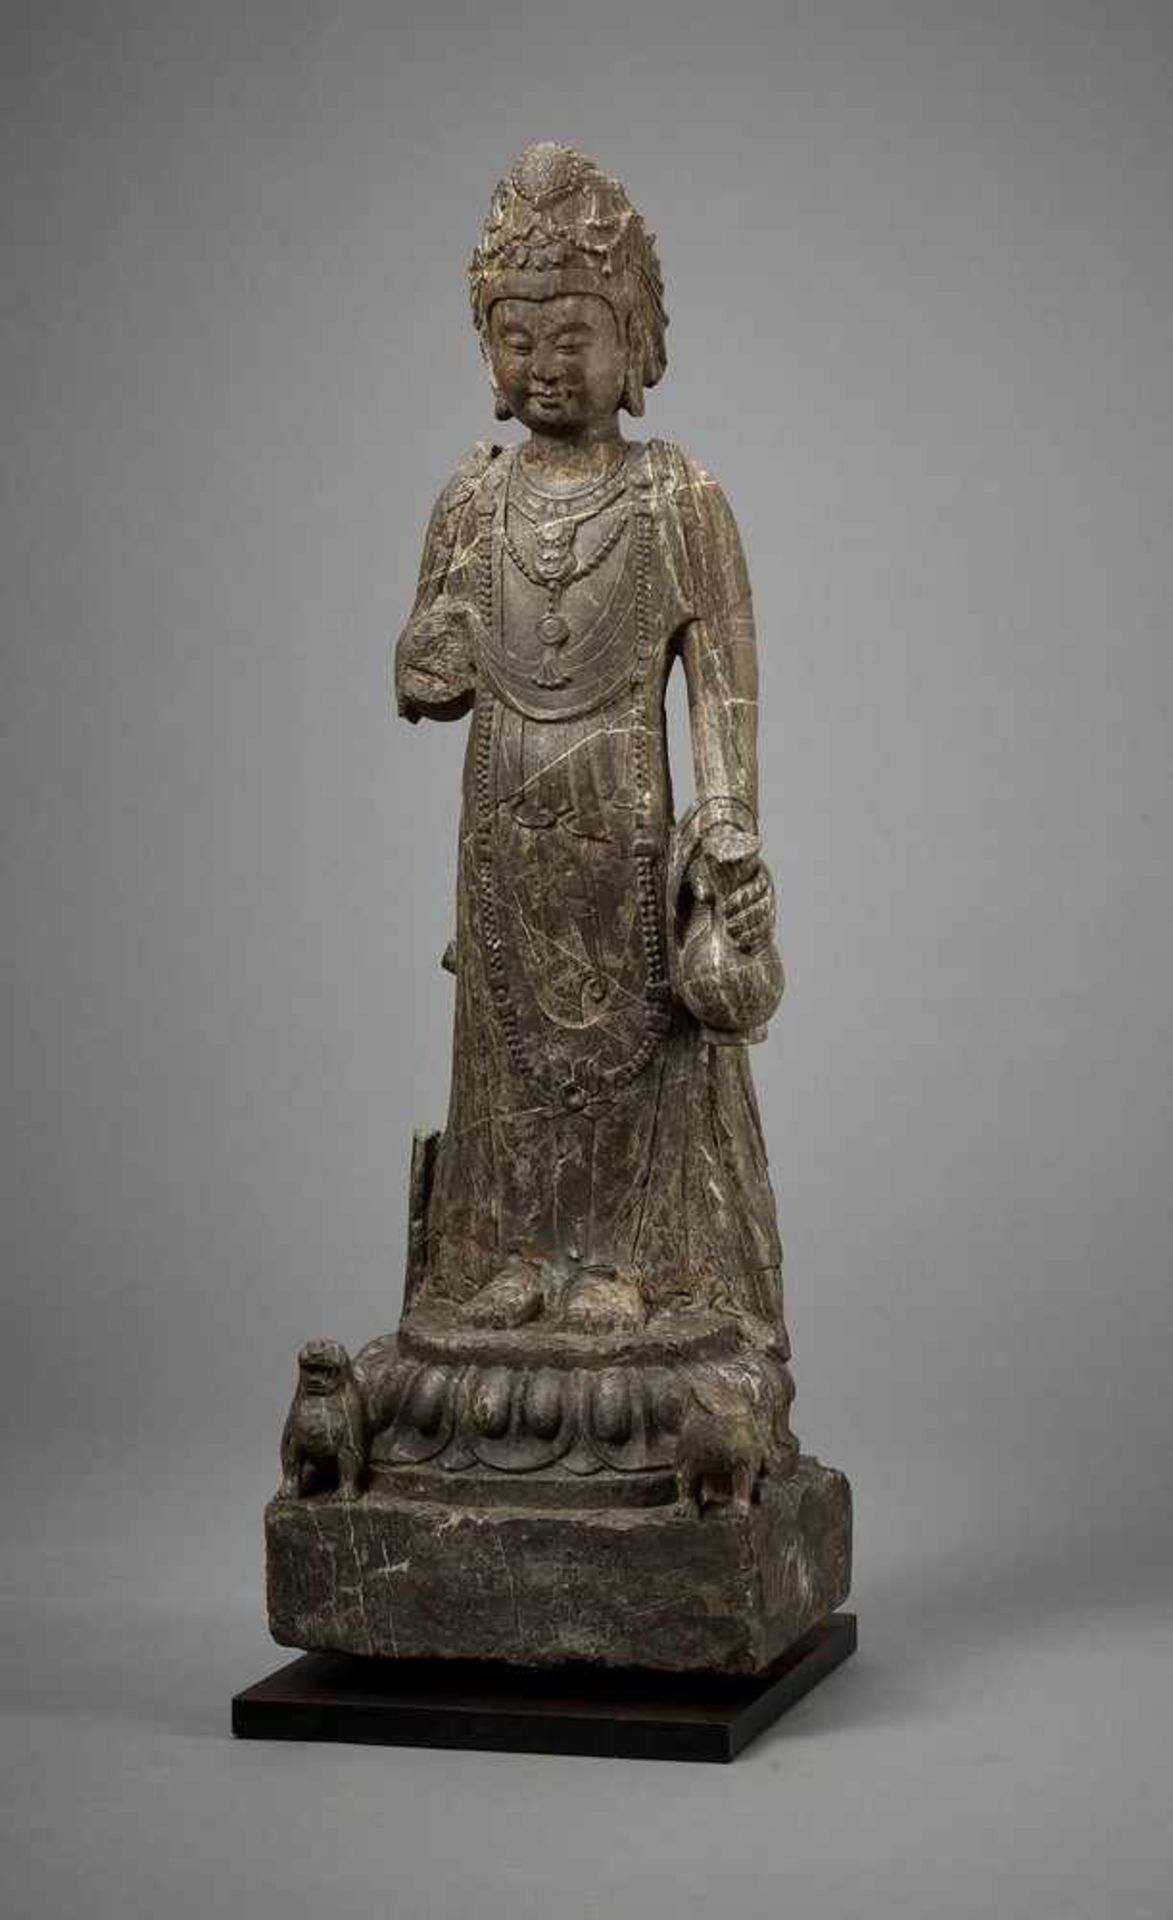 AN EXCEPTIONAL LARGE LIMESTONE FIGURE OF A BODHISATTVA, TANG DYNASTY